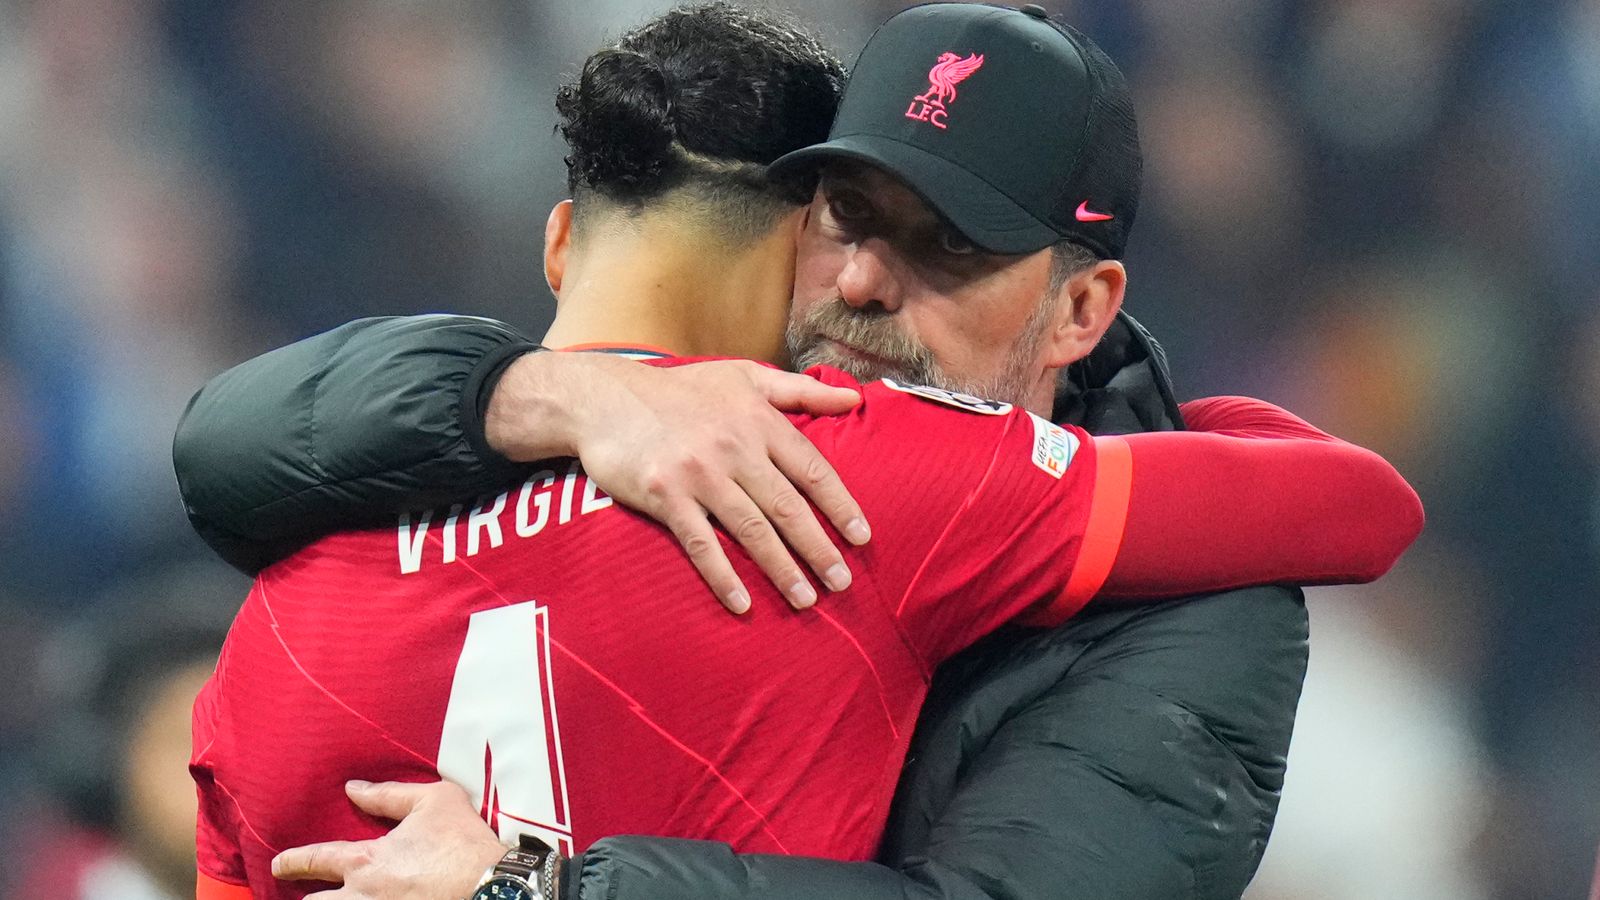 Jurgen Klopp confident Liverpool will come again: 'Book your hotels for next yea..